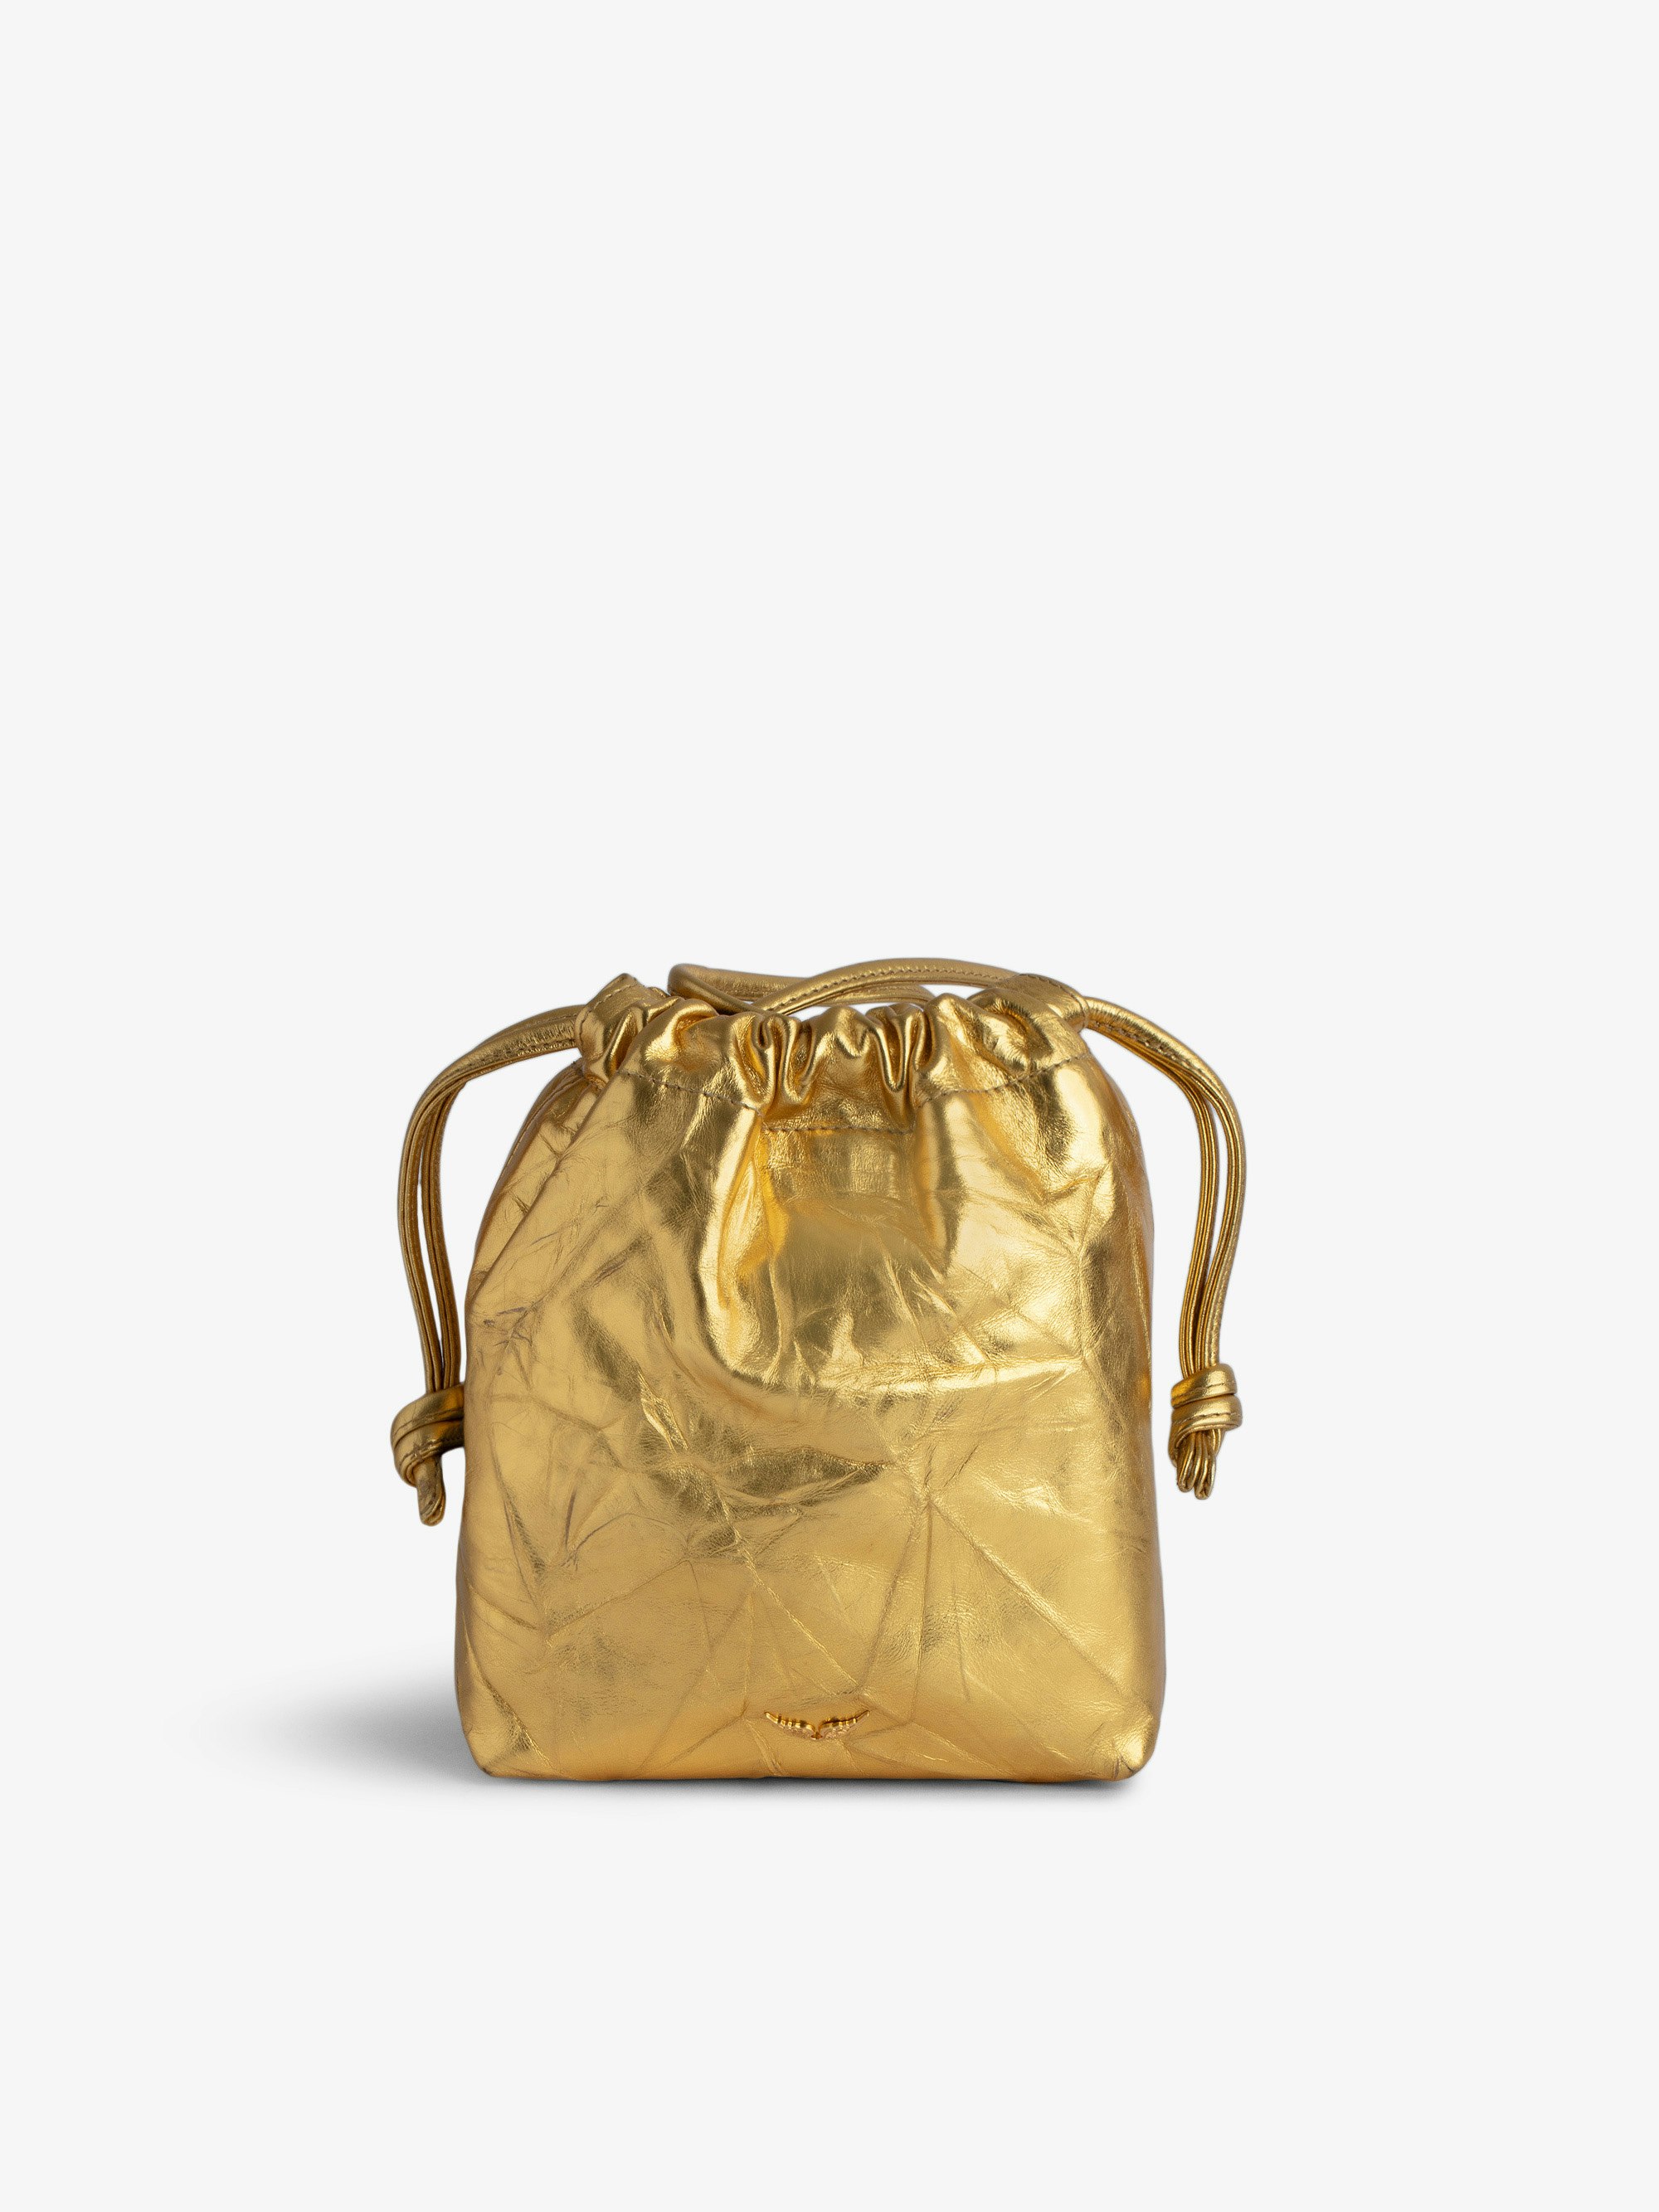 Rock To Go Metallic Bag - Women’s small bucket bag in metallic gold leather with drawstring and shoulder strap.